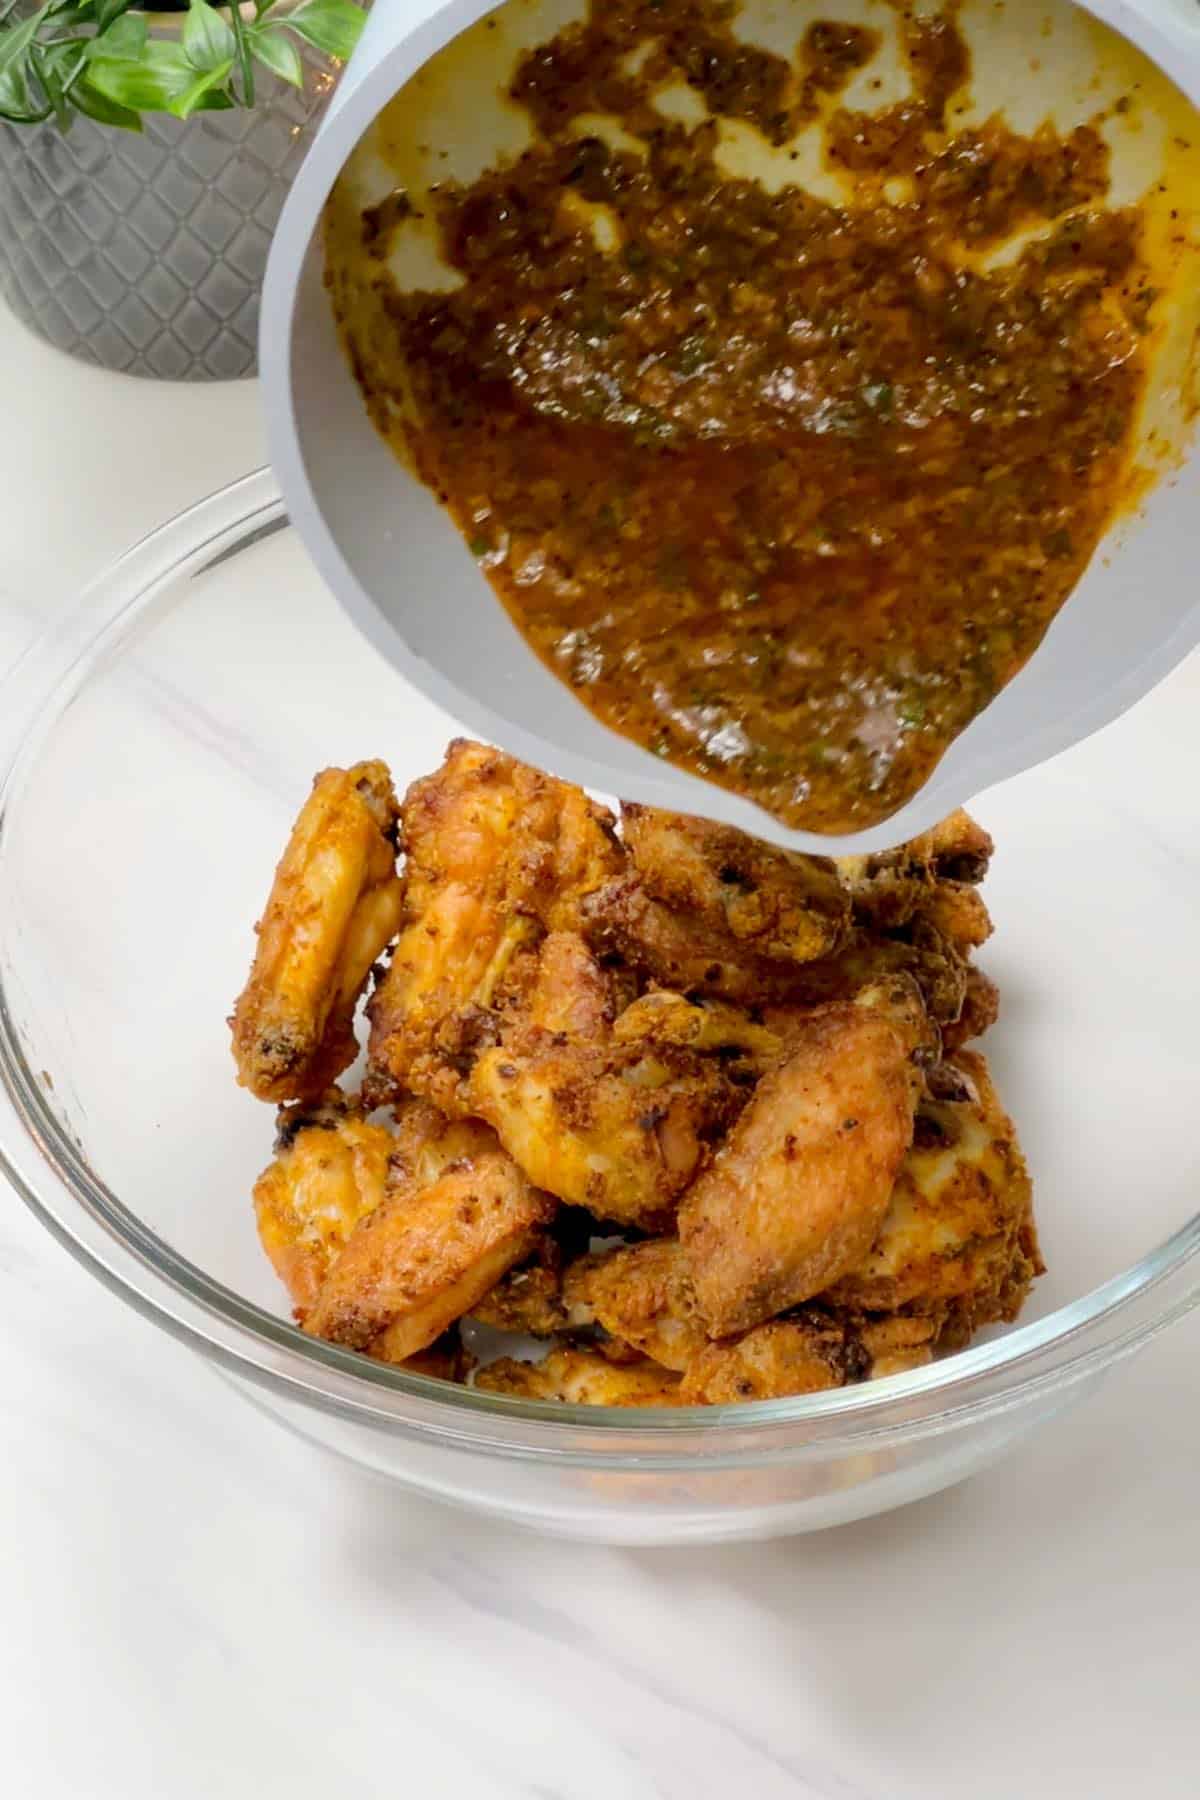 adding garlic pepper sauce to the cooked wings